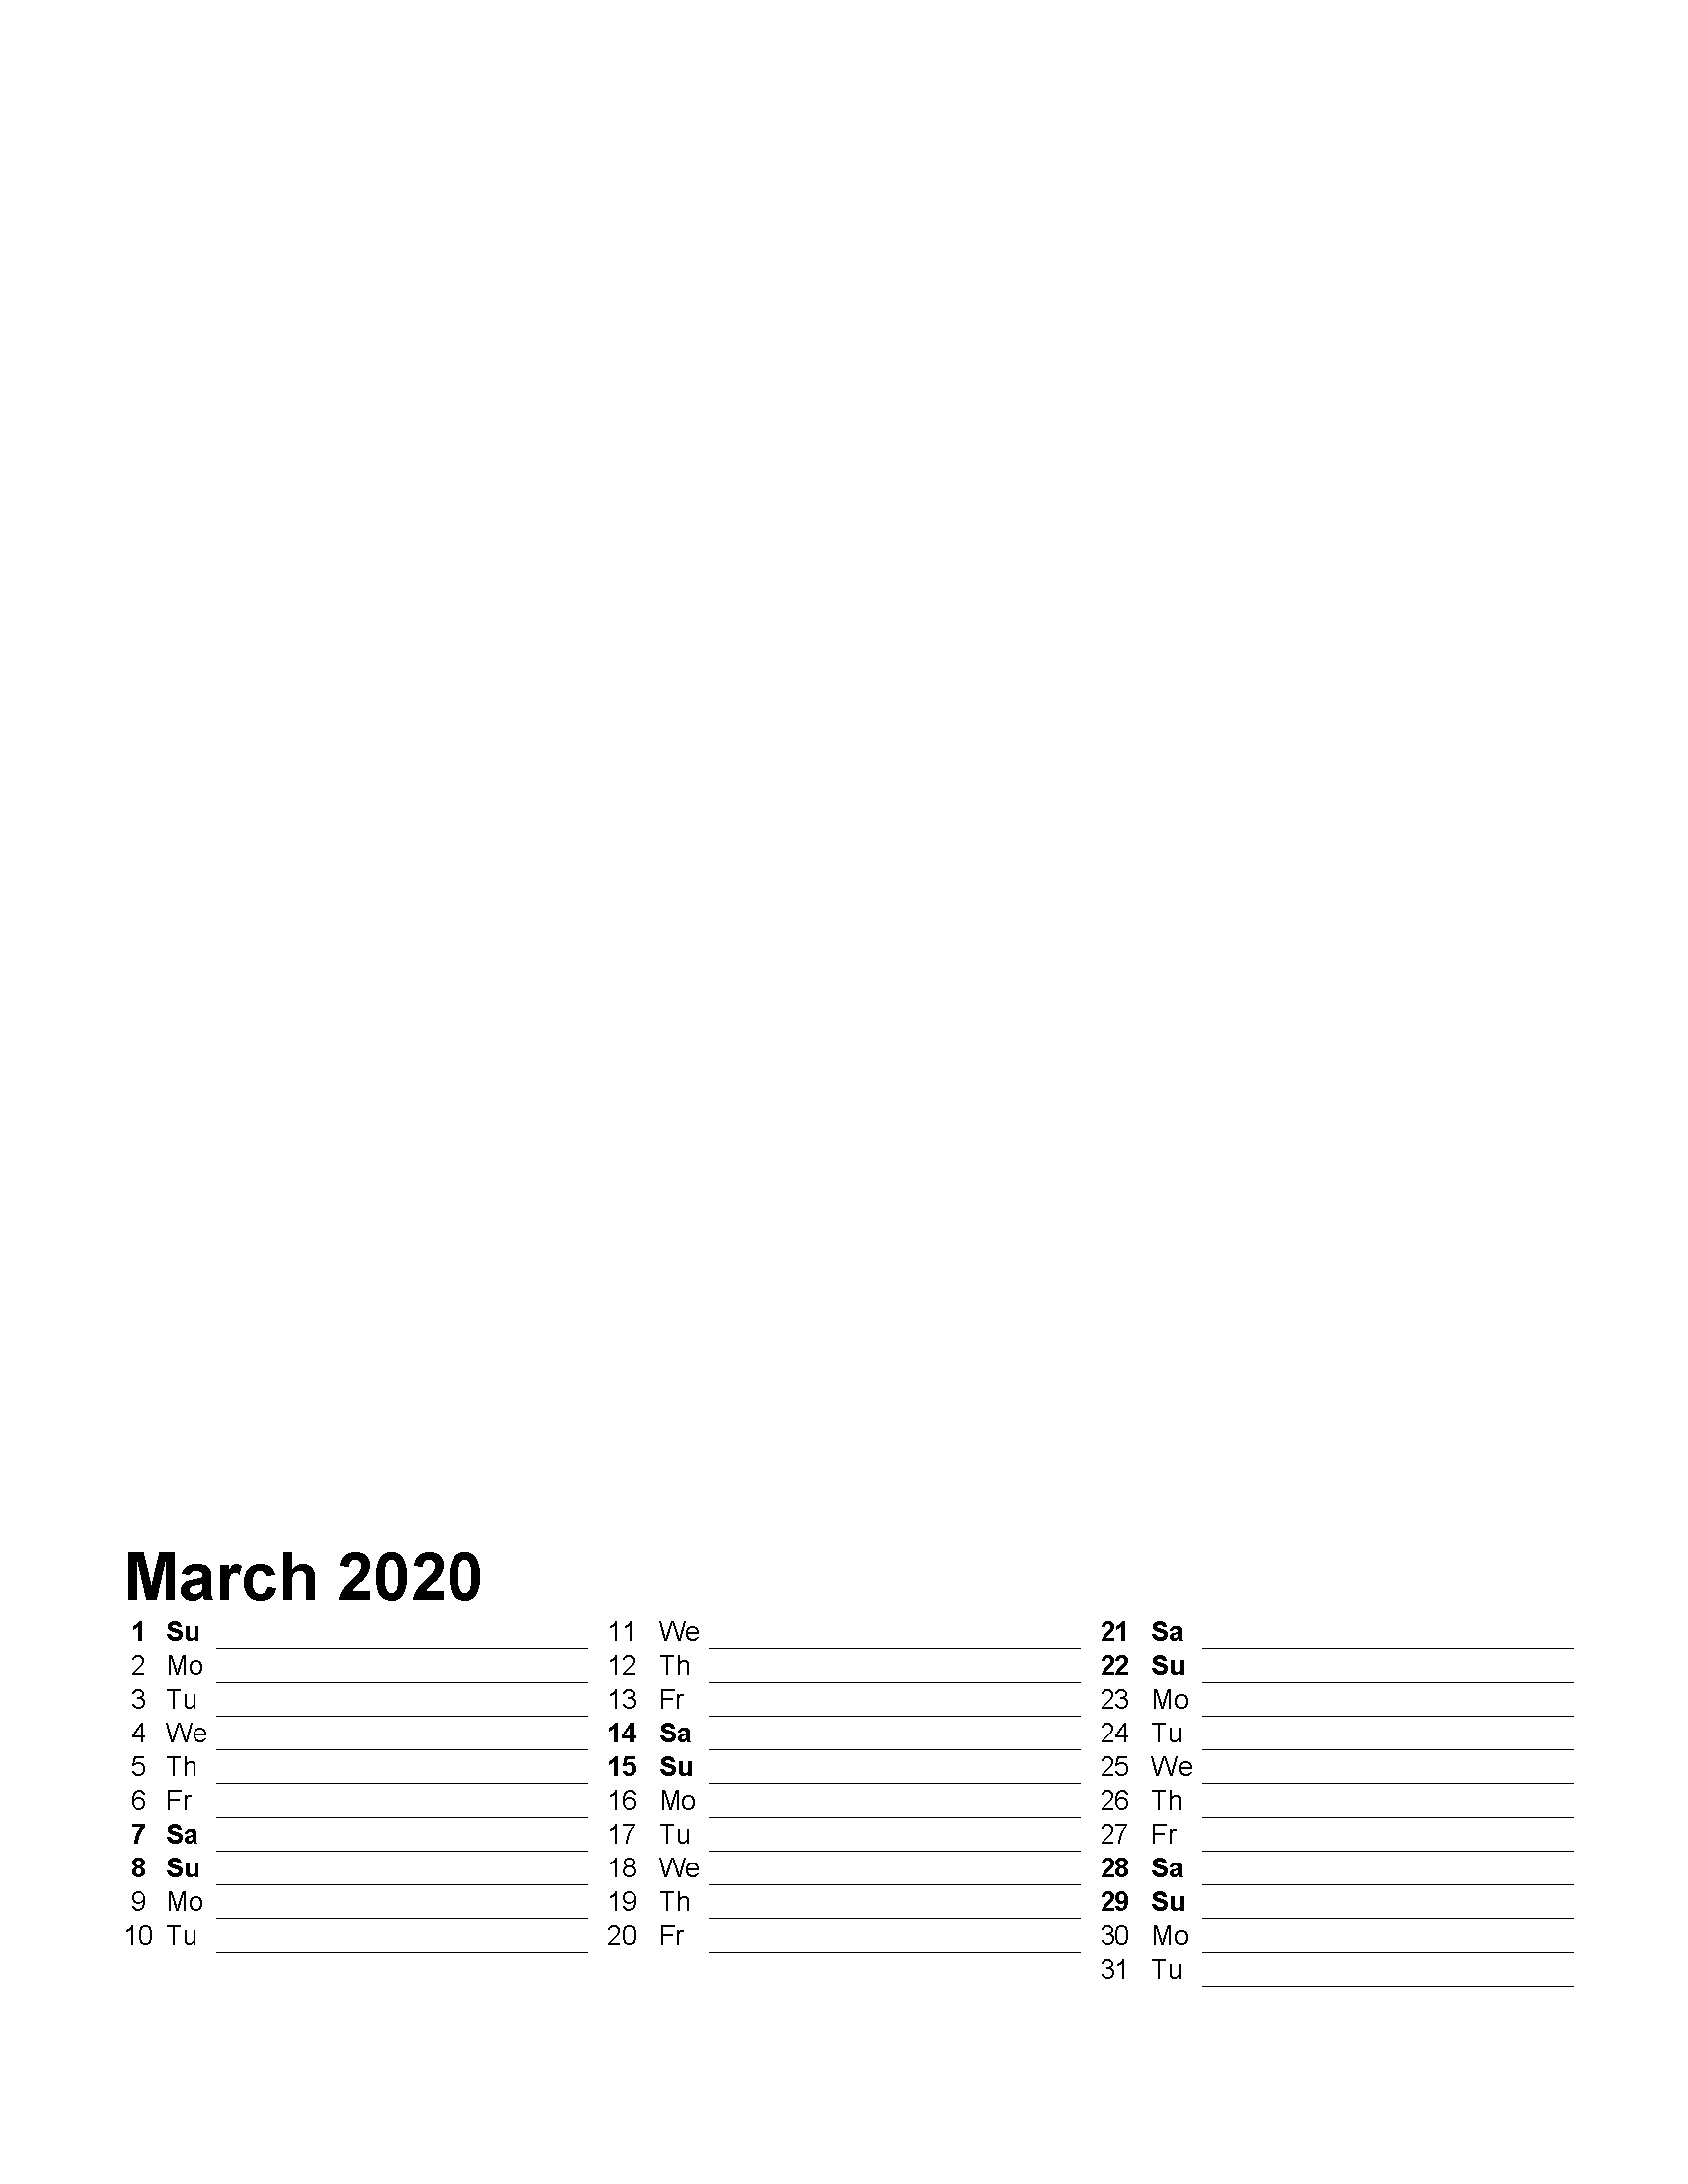 Printable Photo Calendar March 2020 with Holidays Template